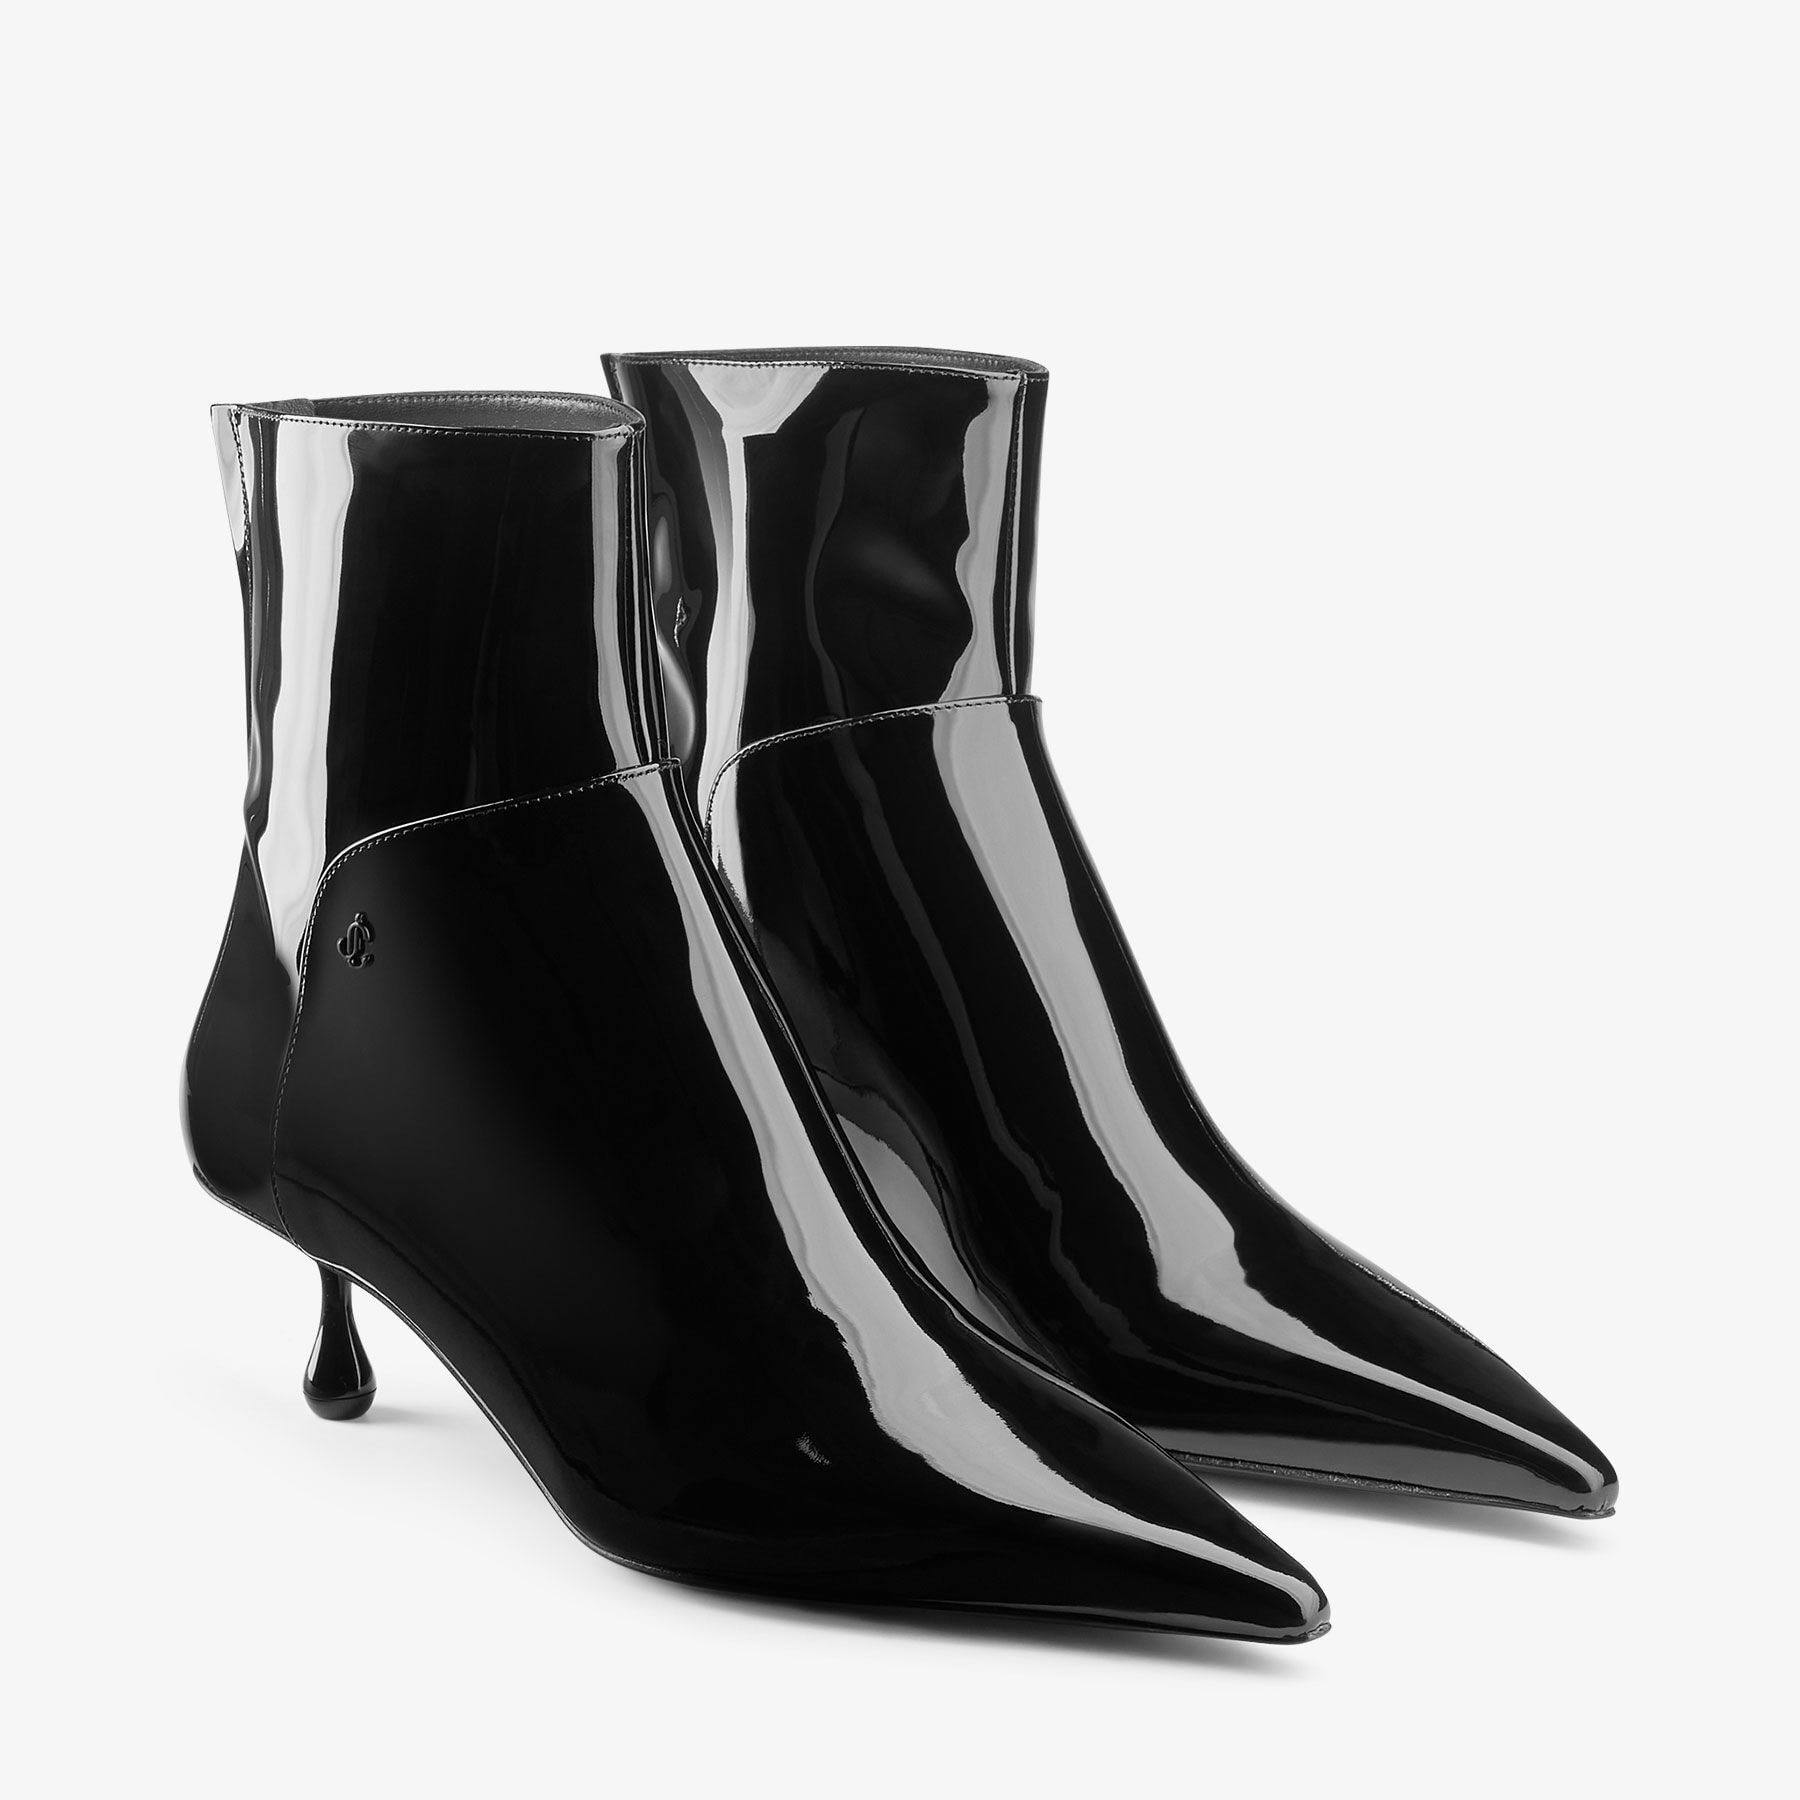 Cycas Ankle Boot 50
Black Patent Leather Ankle Boots - 3